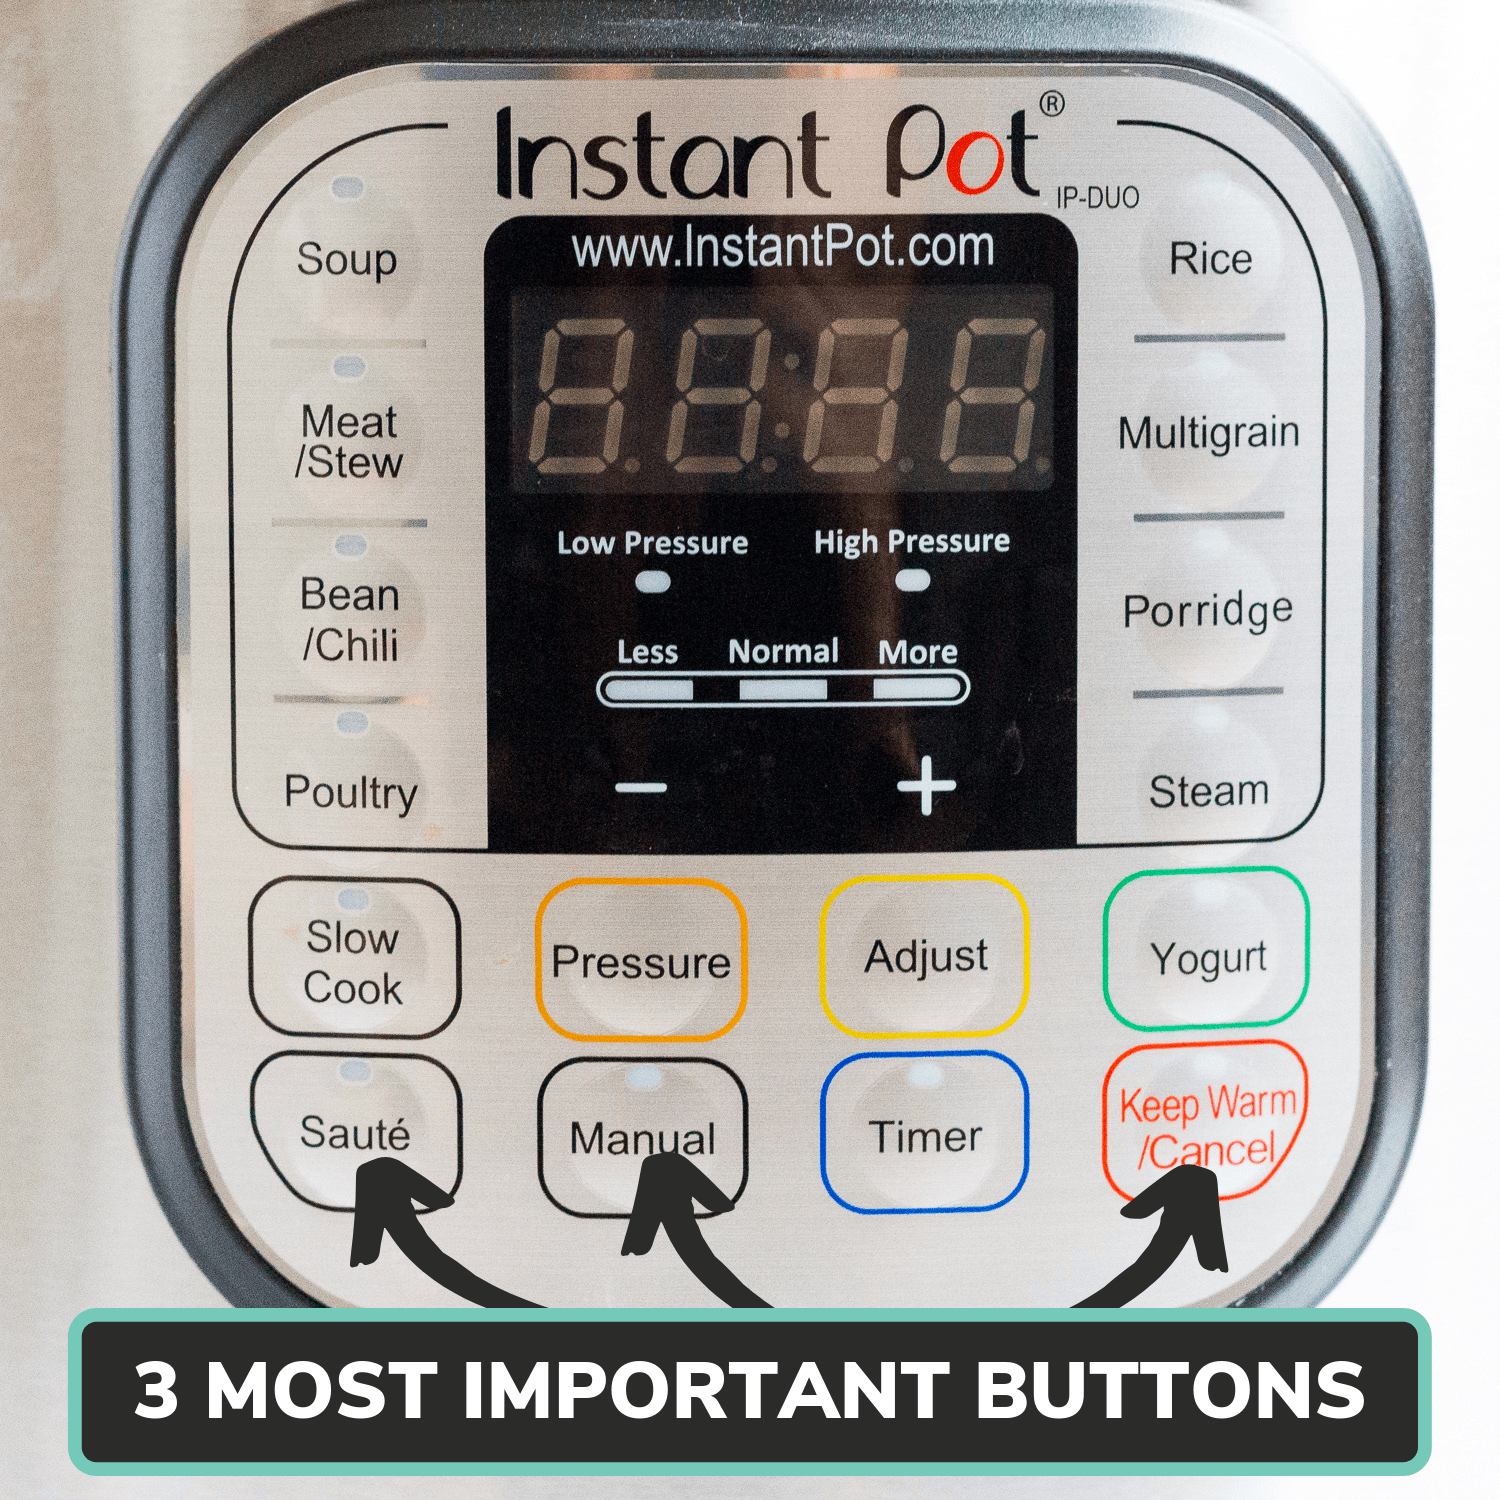 Instant Pot control panel with arrows showing the 3 most important buttons